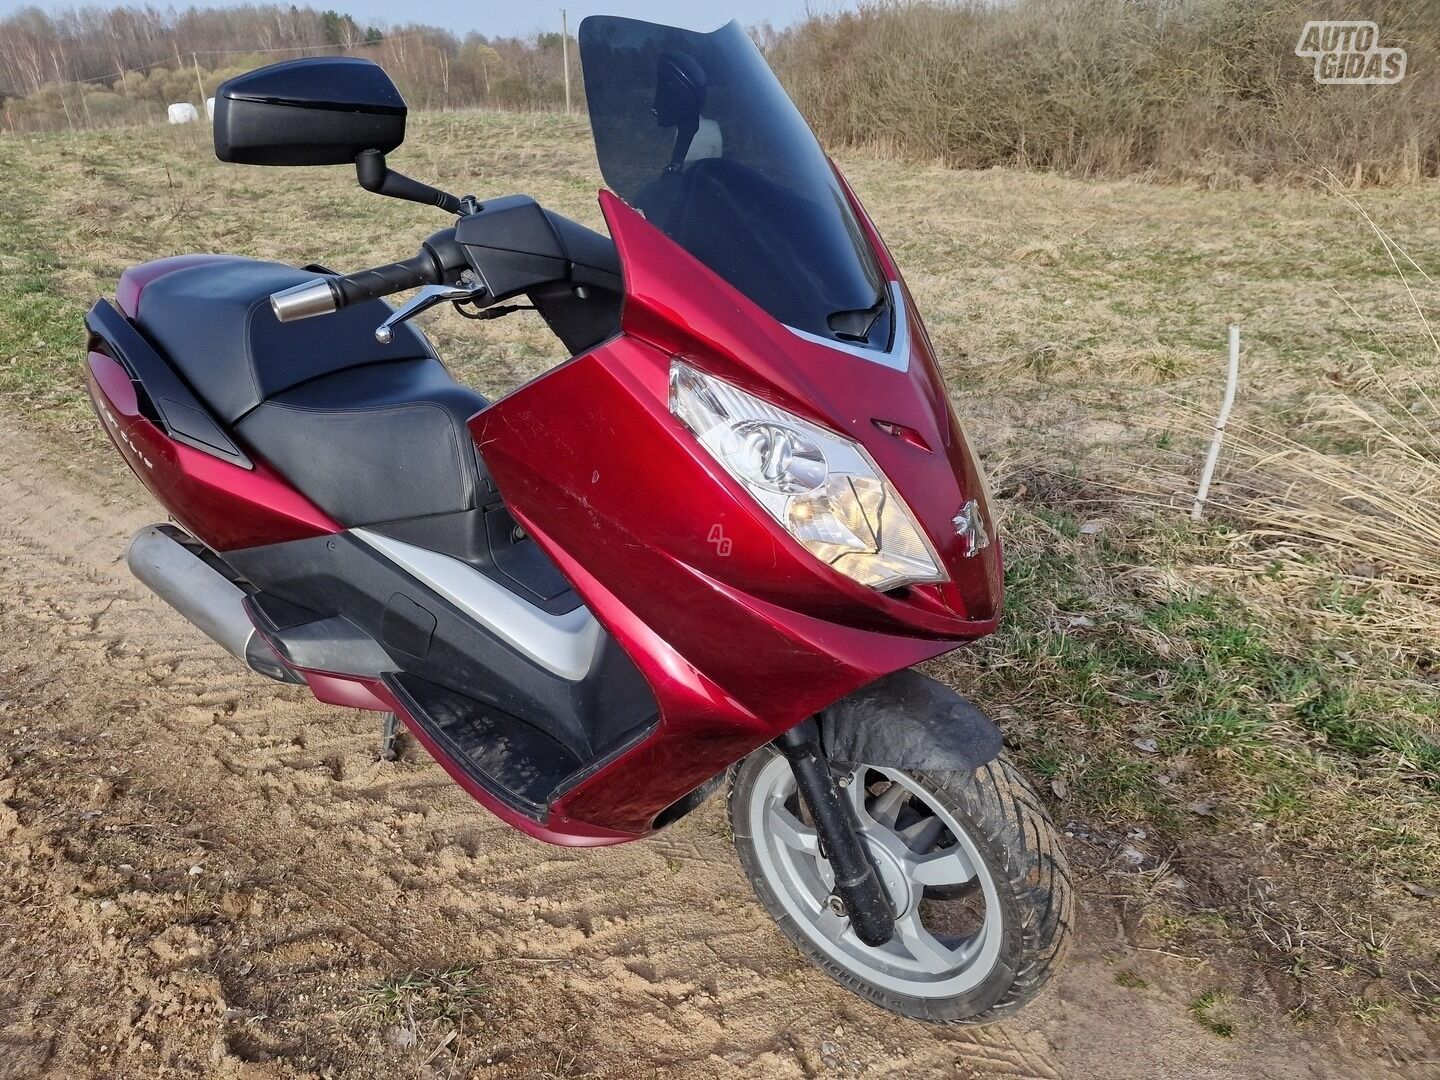 Peugeot Satelis 2012 y Scooter / moped